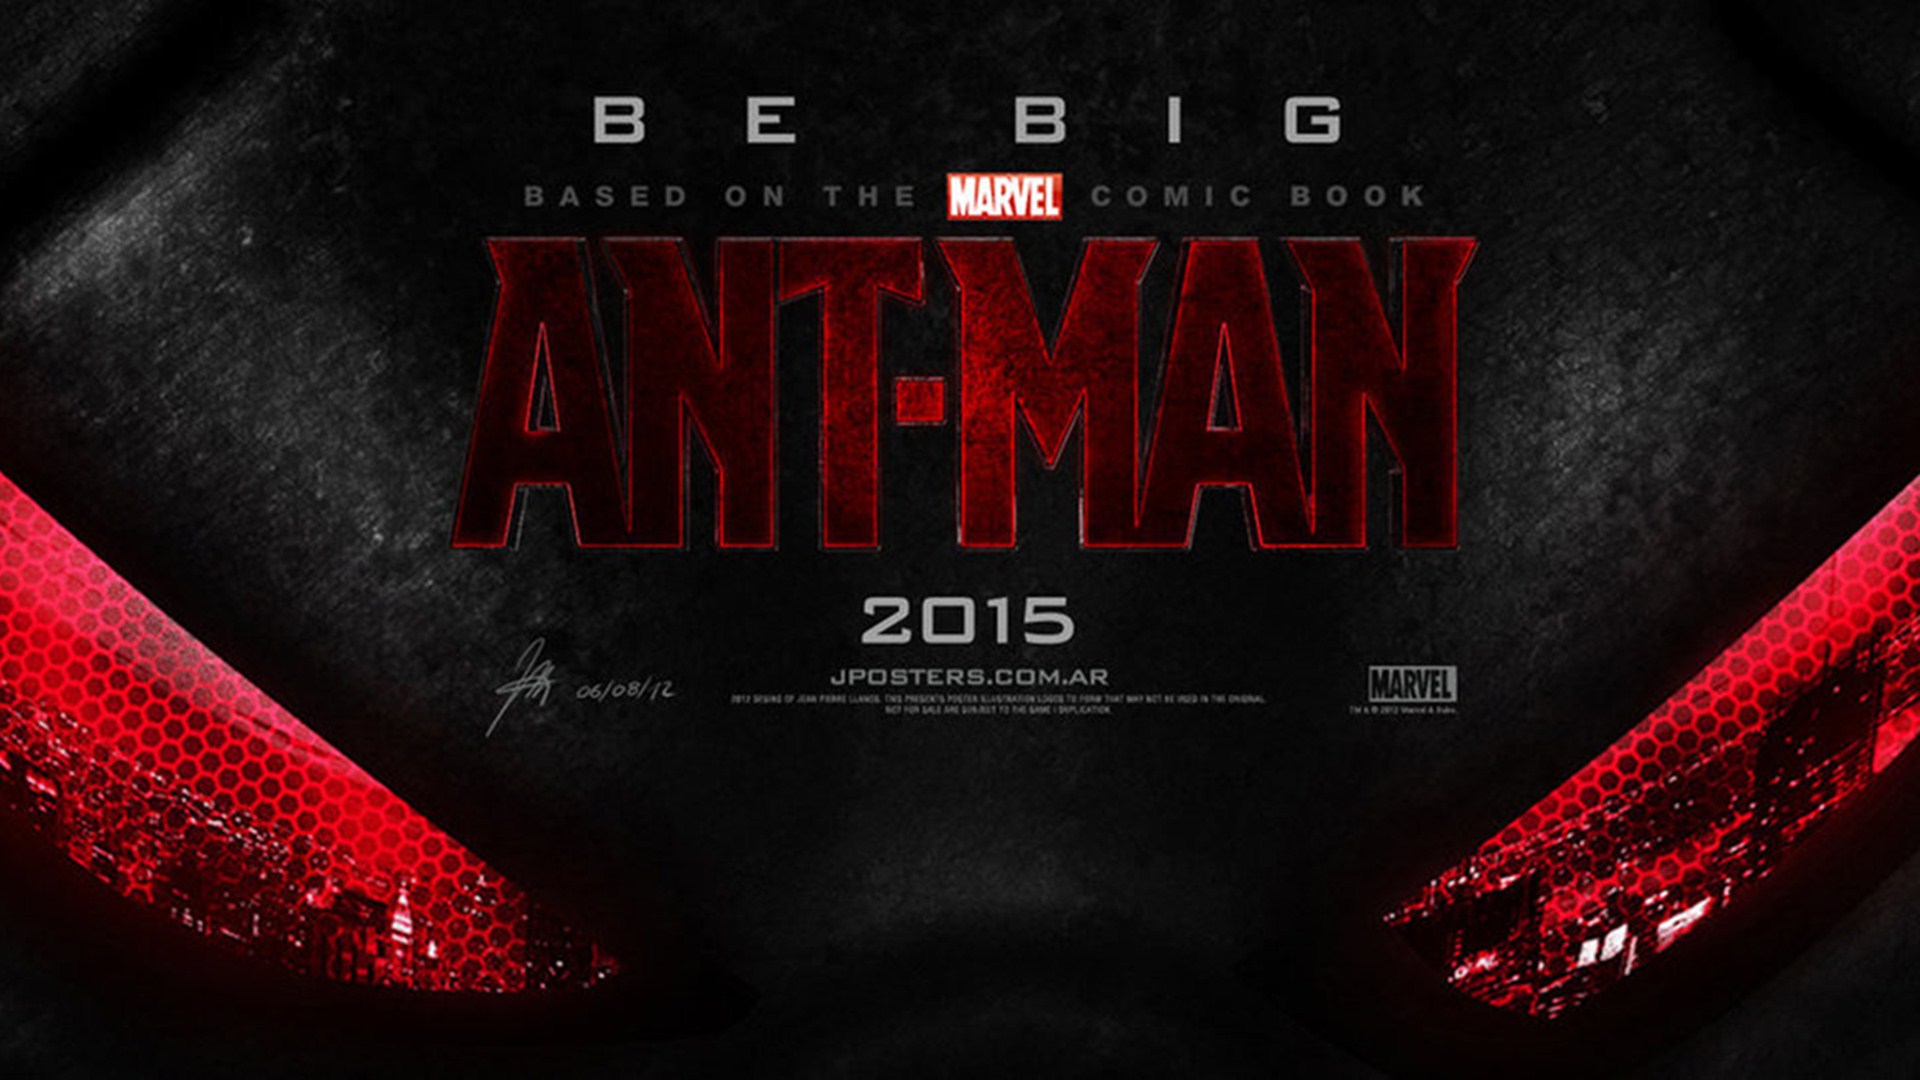 Marvel Ic Book Ant Man HD Wallpaper Search More High